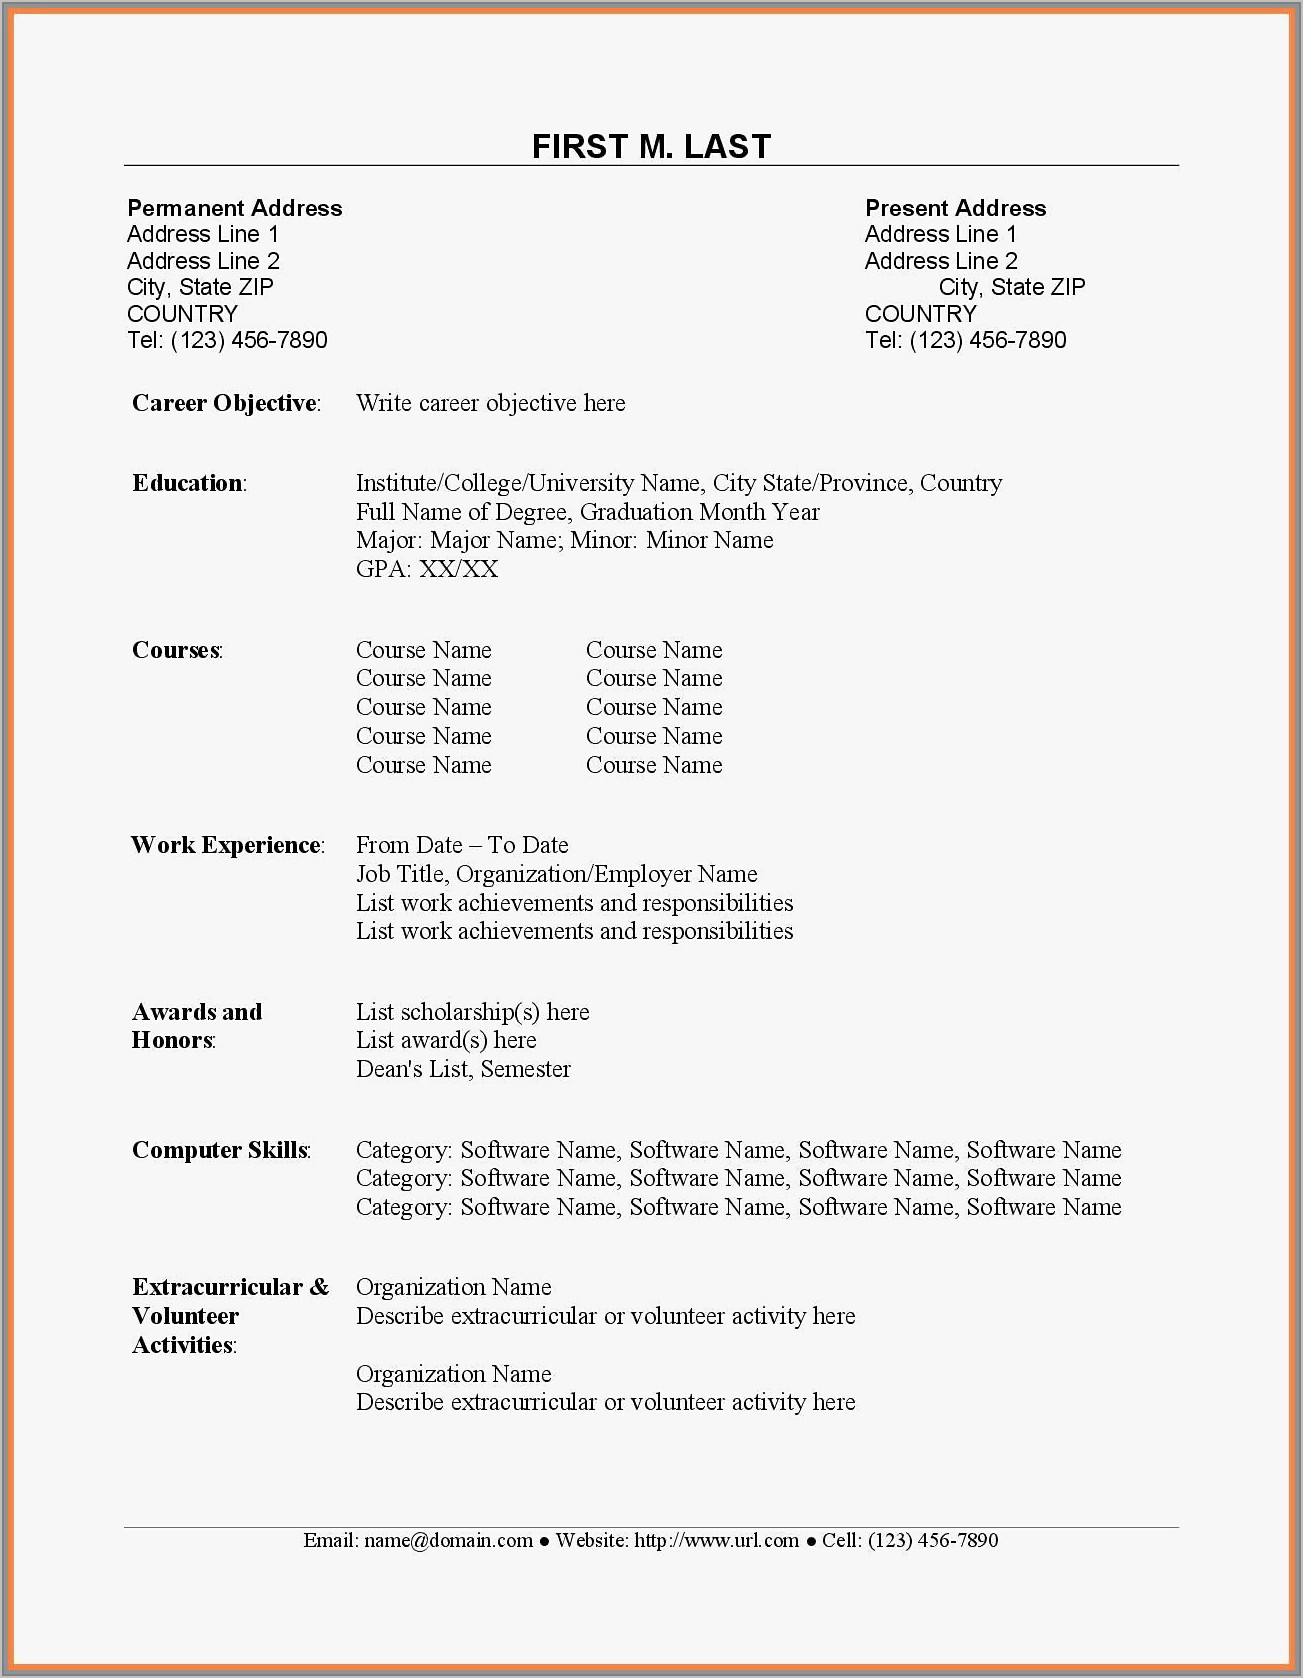 Professional Cv For Chief Accountant